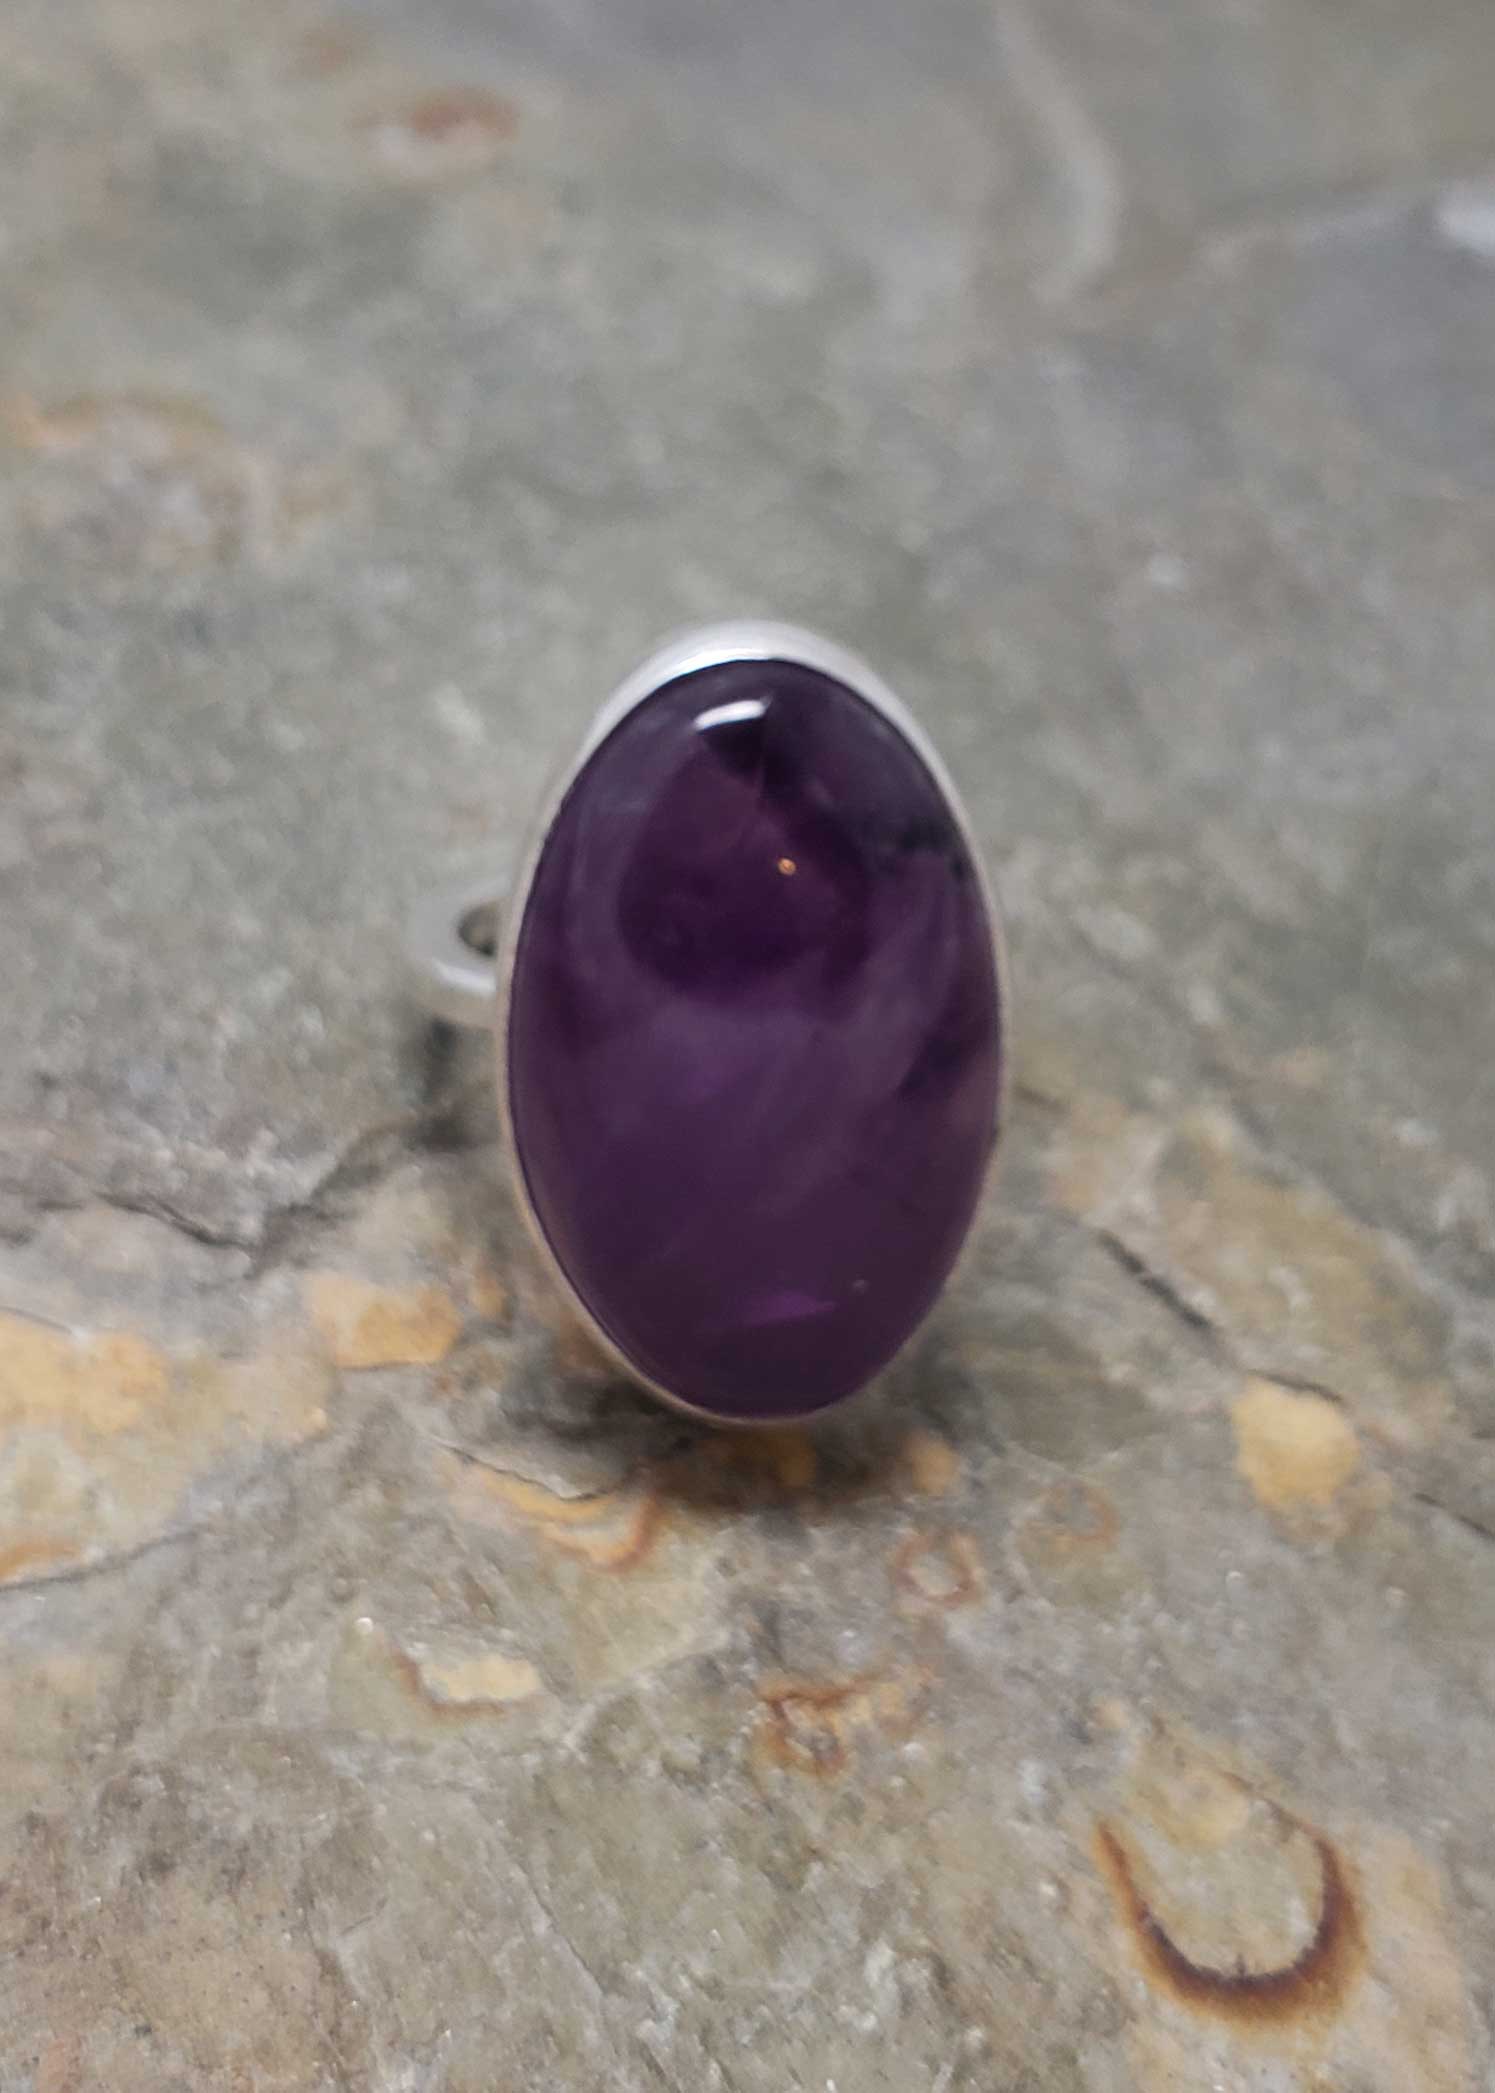 Amethyst oval statement ring in size 7.5.